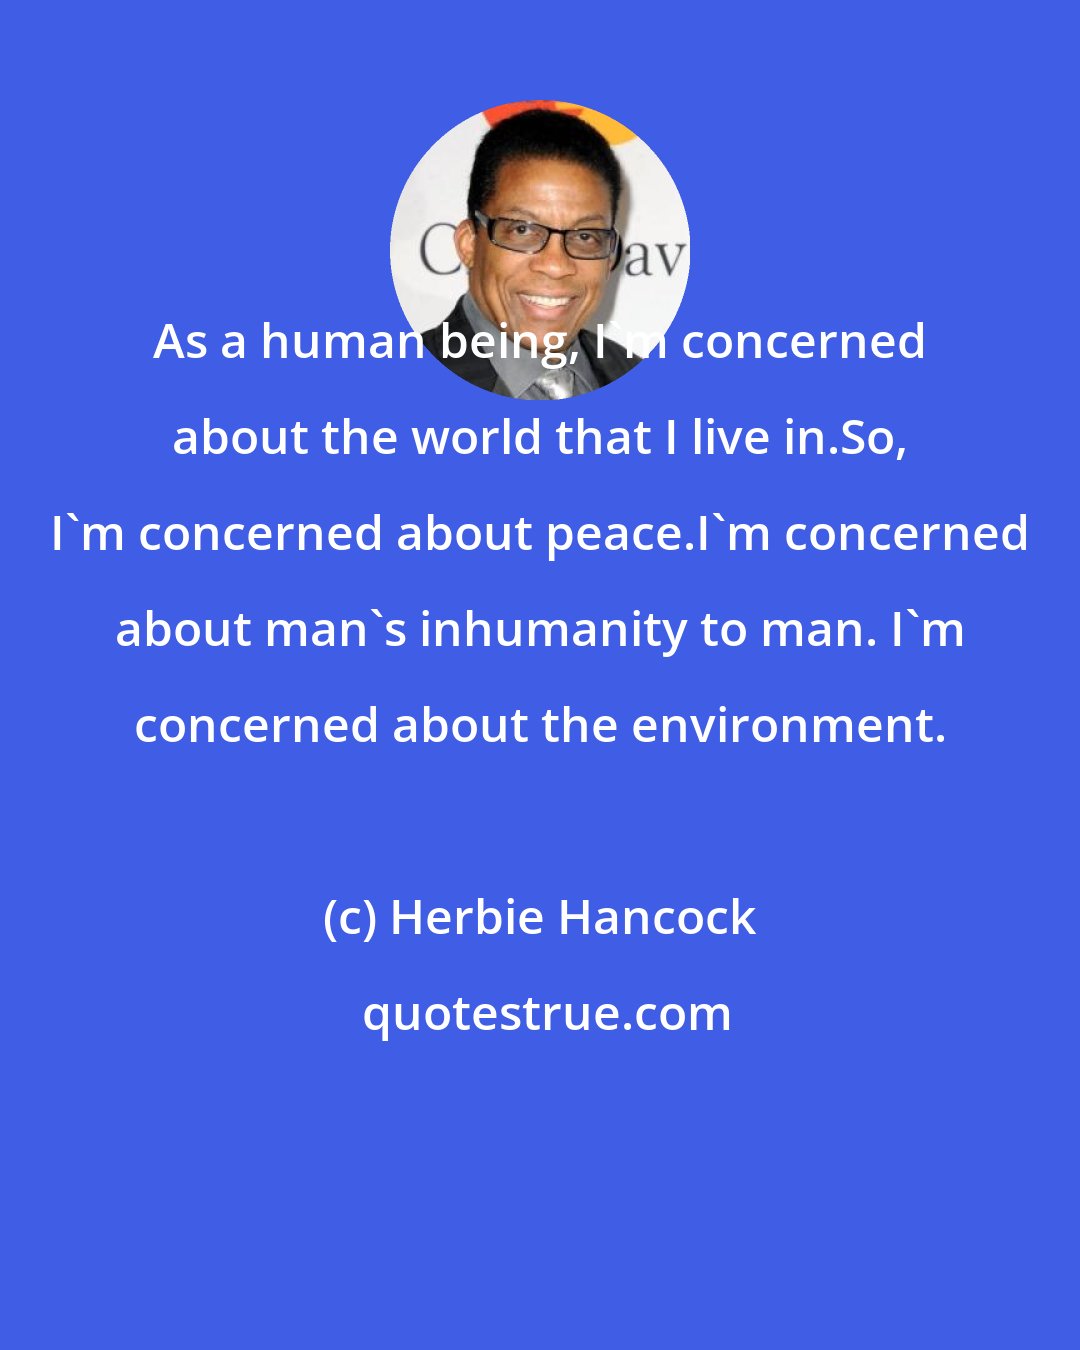 Herbie Hancock: As a human being, I'm concerned about the world that I live in.So, I'm concerned about peace.I'm concerned about man's inhumanity to man. I'm concerned about the environment.